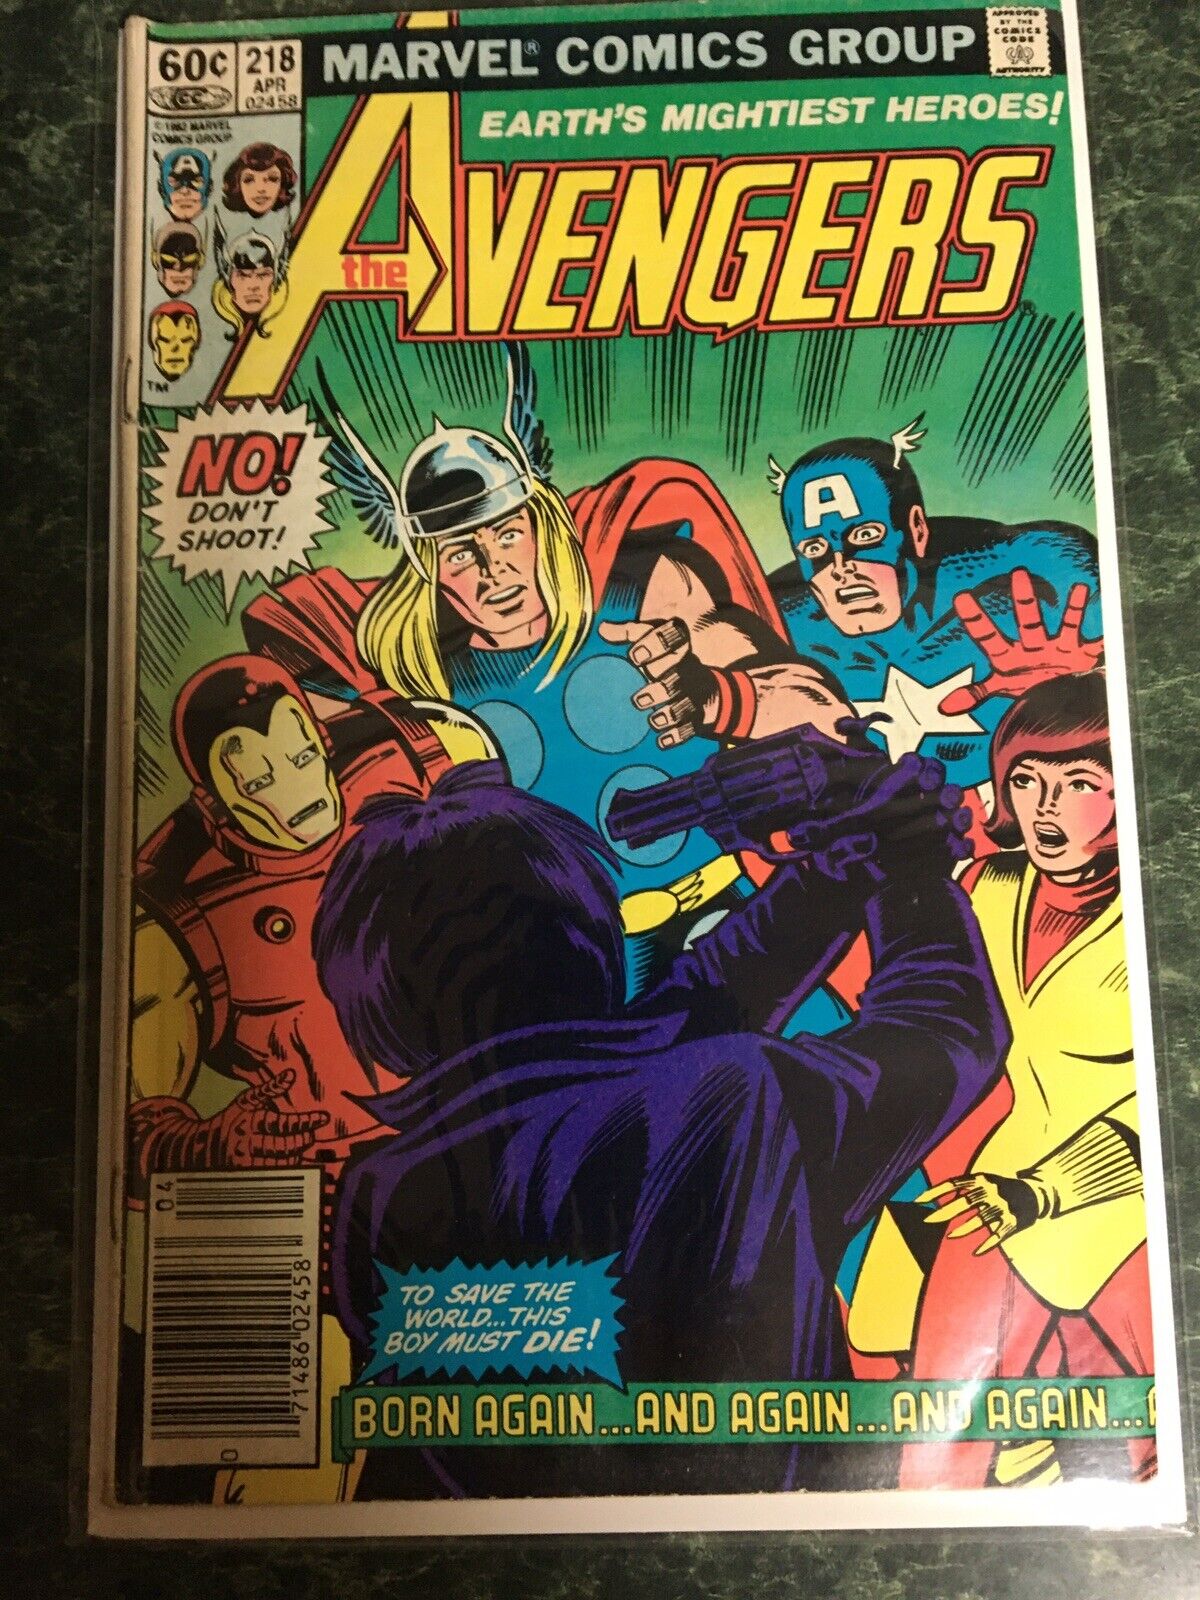 THE AVENGERS #218 (1982) MARVEL COMICS - NEWSSTAND ISSUE - F+